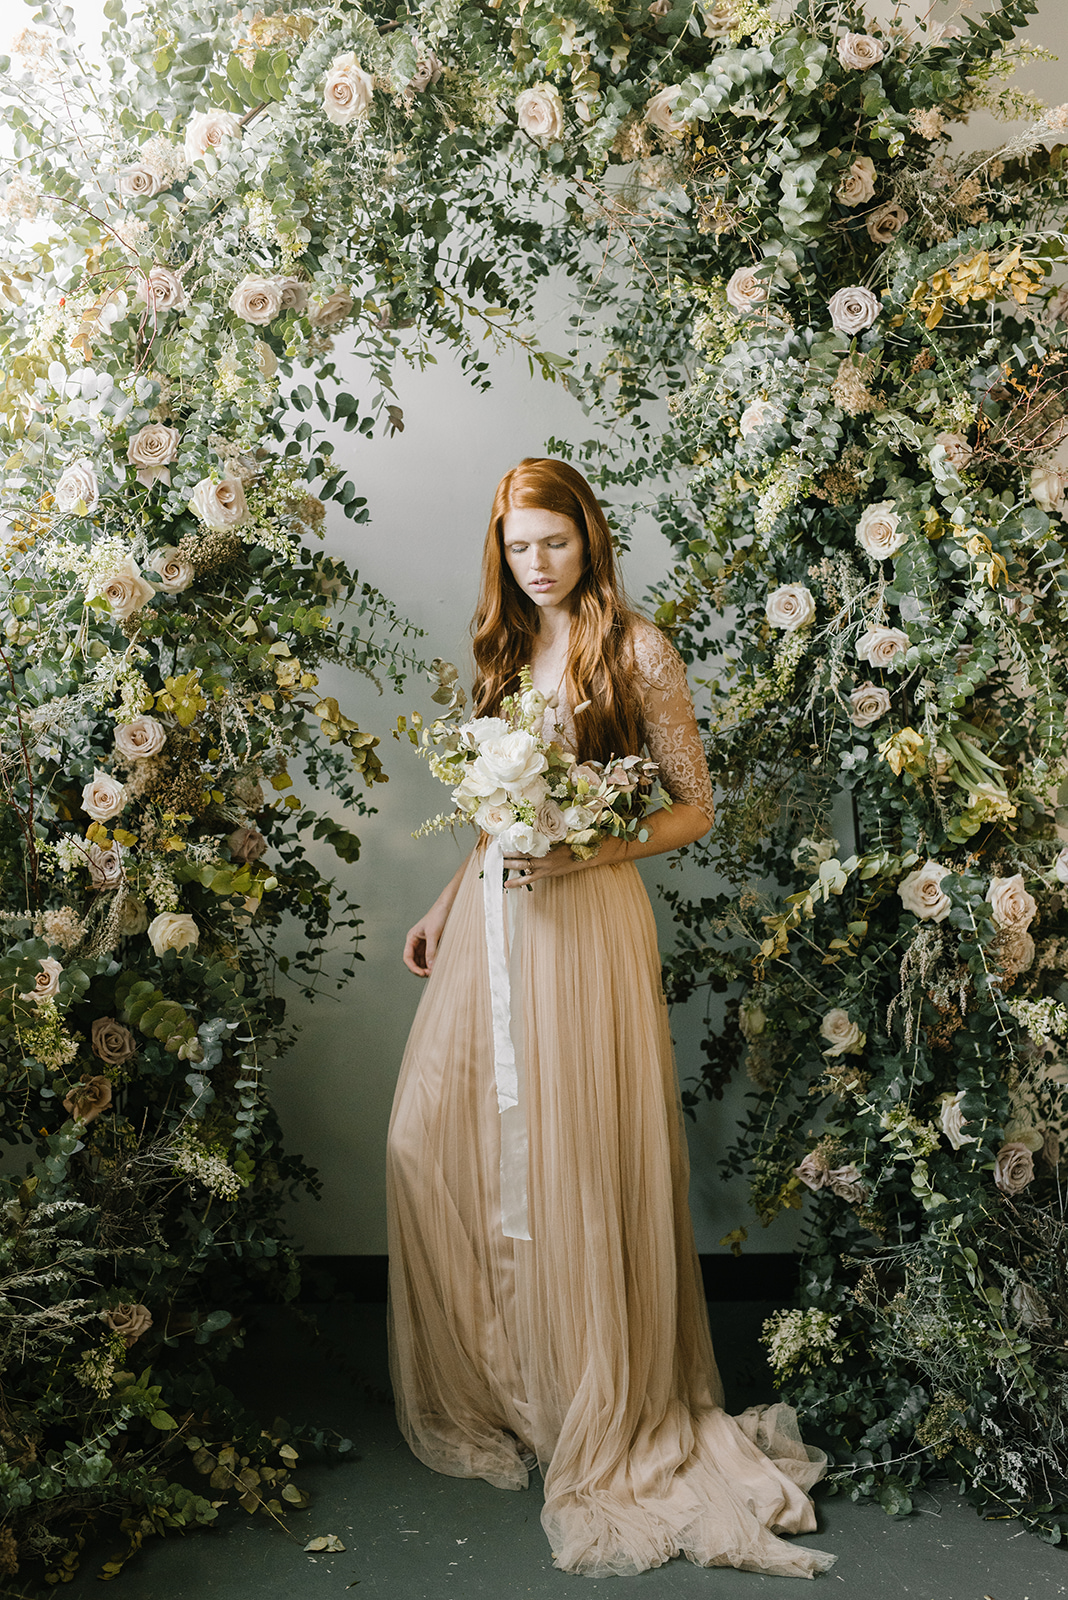 A model bride stands under a thick floral wreath with white roses holding a white bridal bouquet